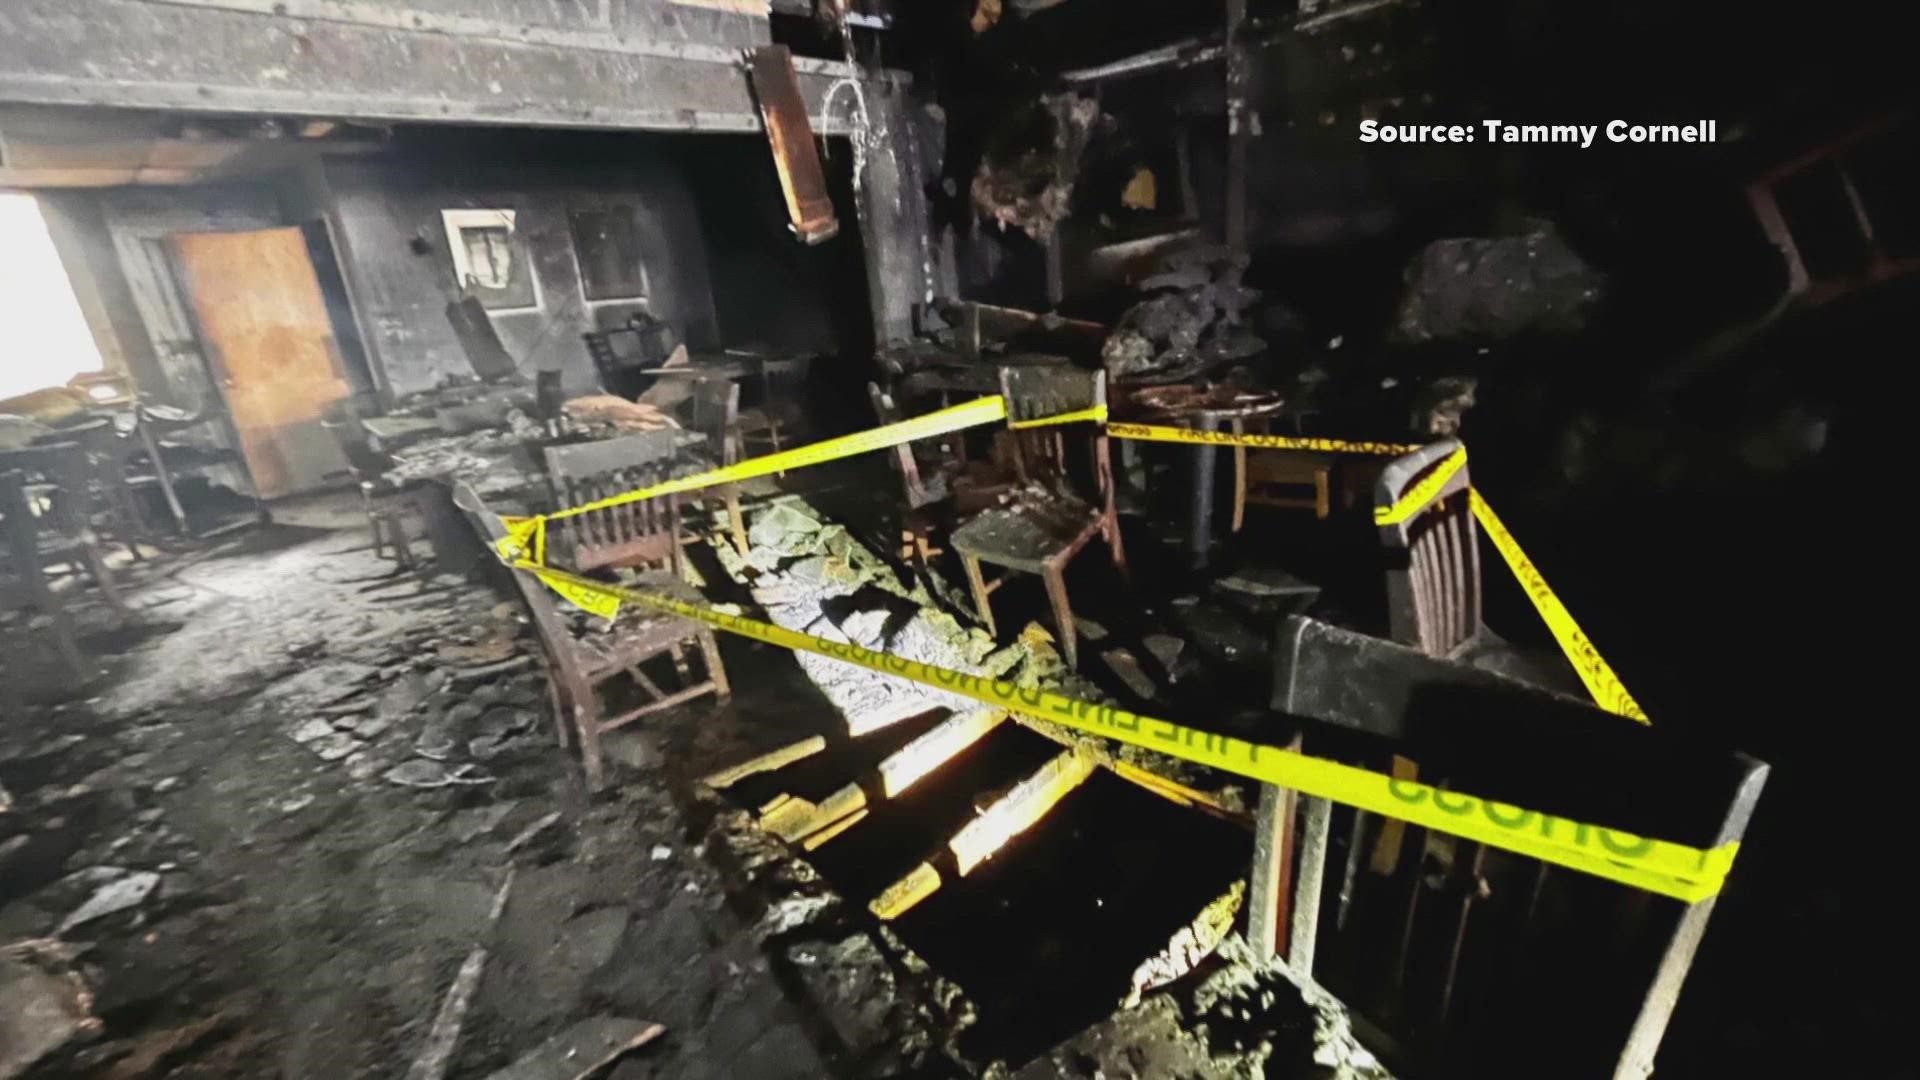 Pictures from inside Brooker T's Cafe show a charred, melted mess.